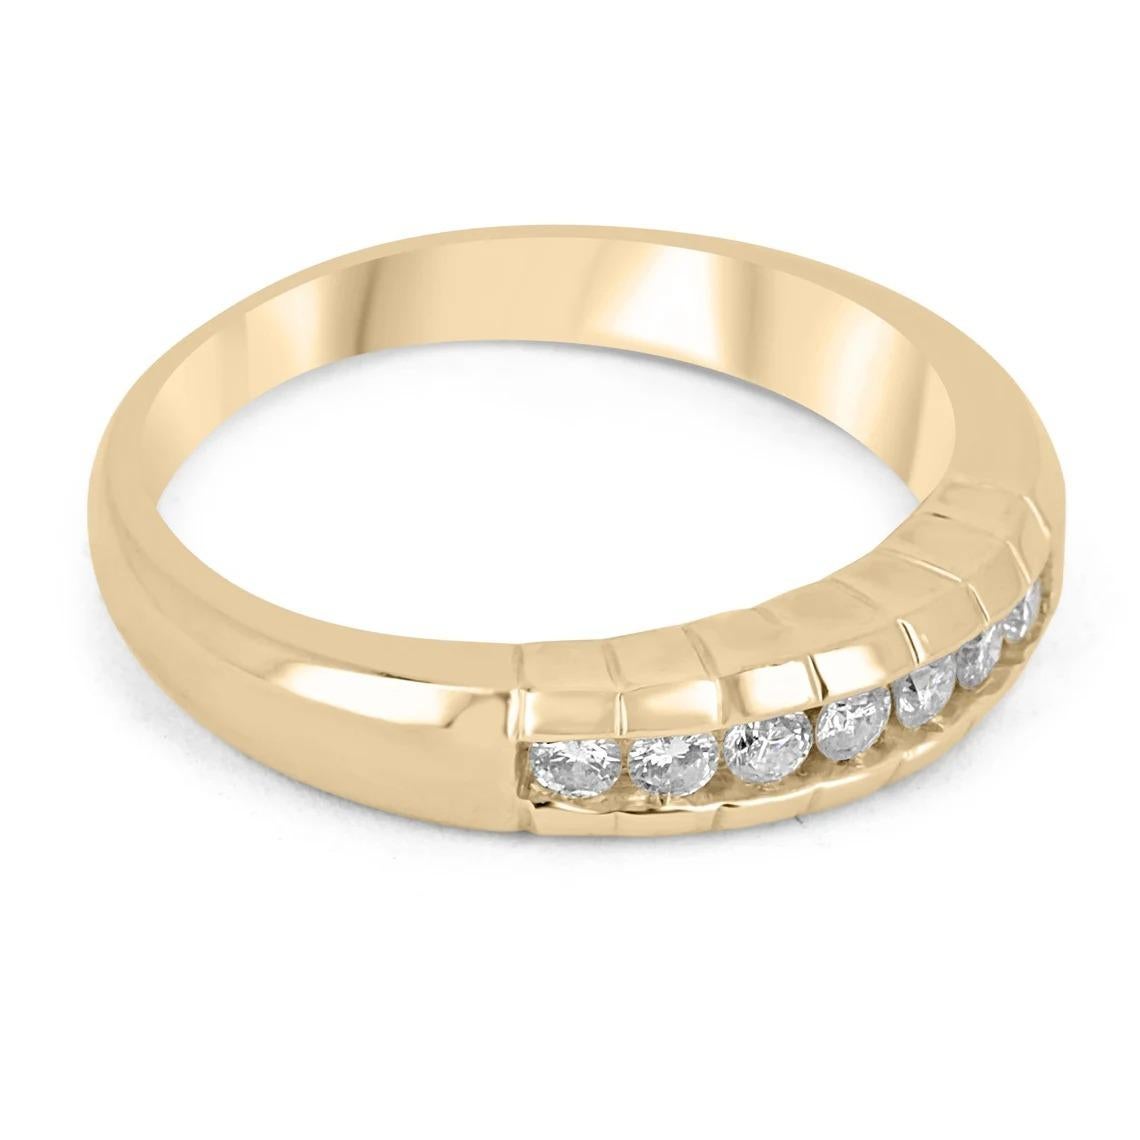 Displayed is a men's diamond wedding band in 14K yellow gold. Soft lines highlight the smooth edges of this ring and provide texture in its simple design. Seven, brilliant-cut diamonds are channel set in the center and are of excellent quality. The